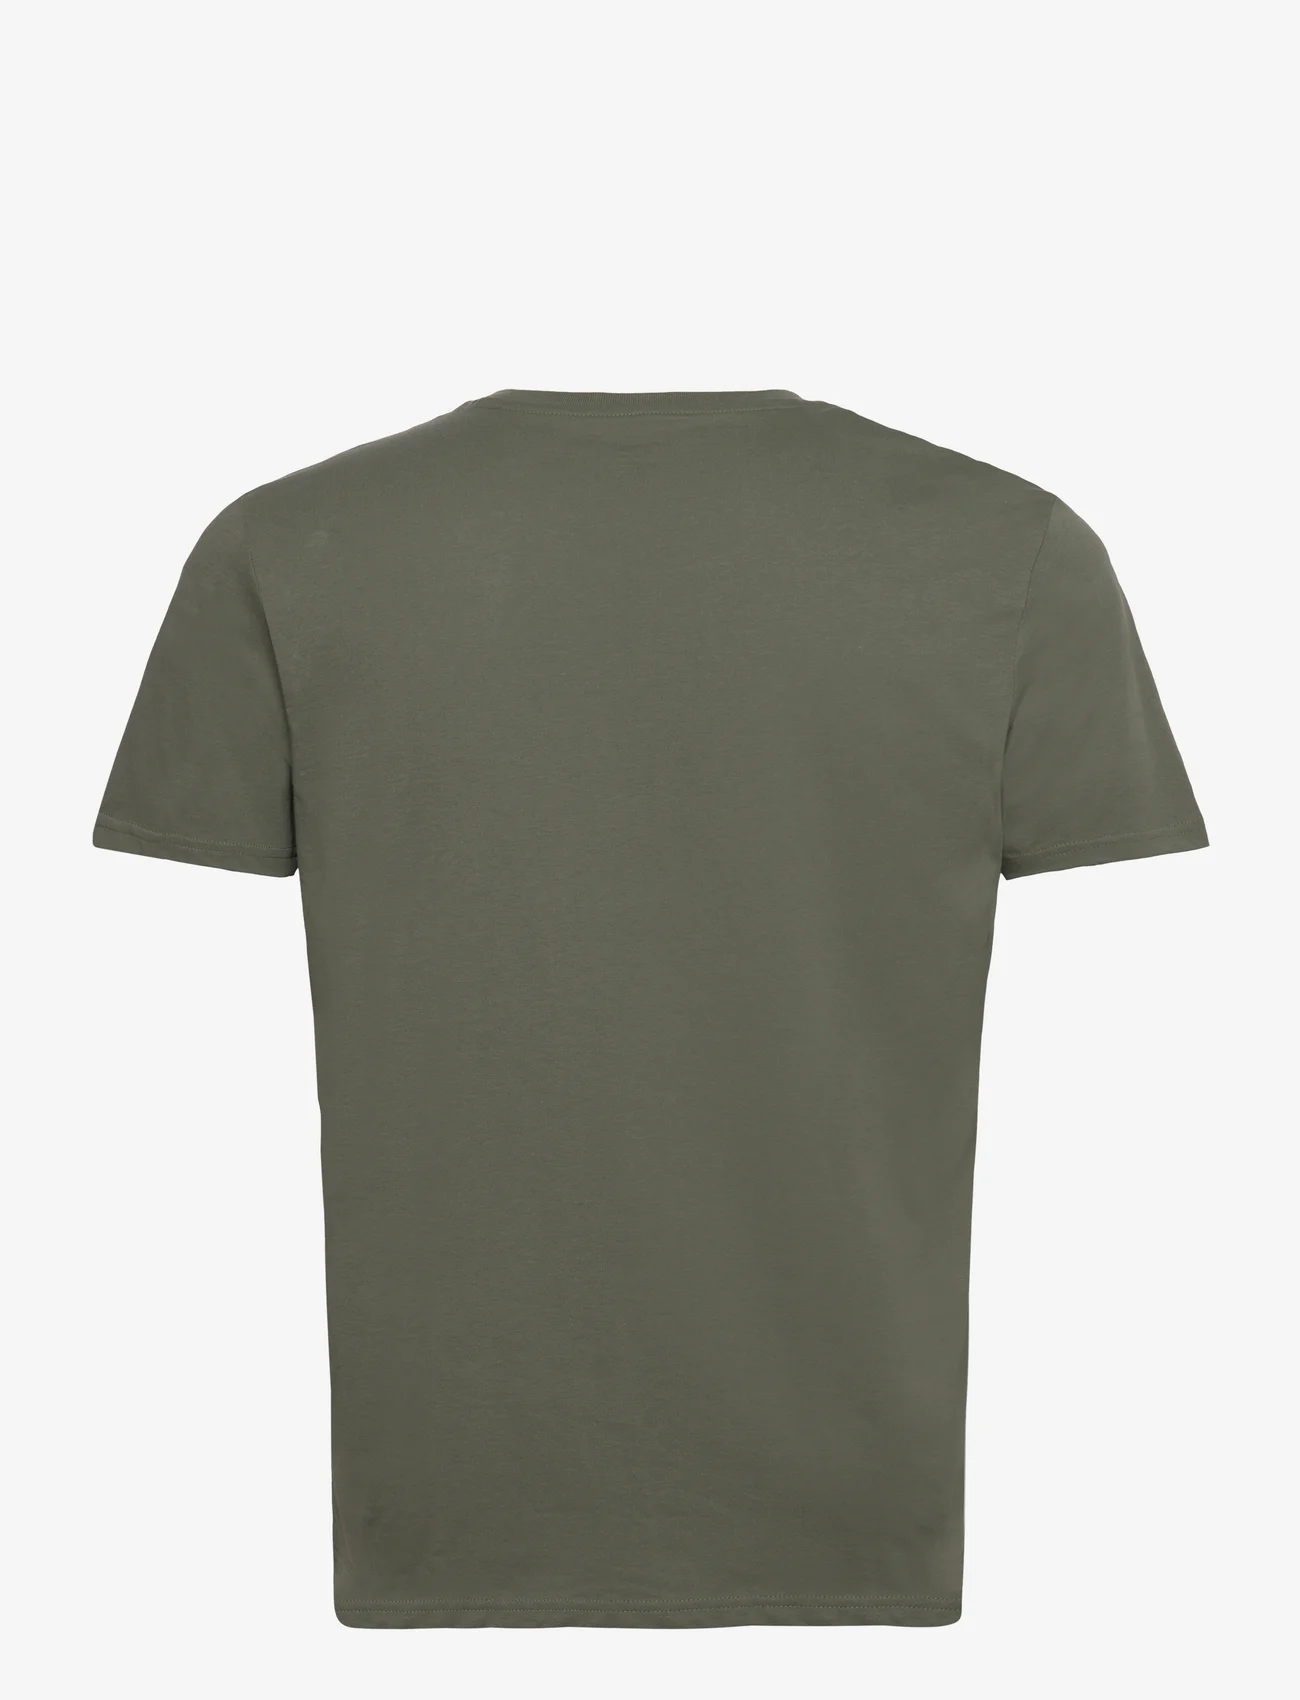 Lee Jeans - SS PATCH LOGO TEE - lowest prices - olive grove - 1